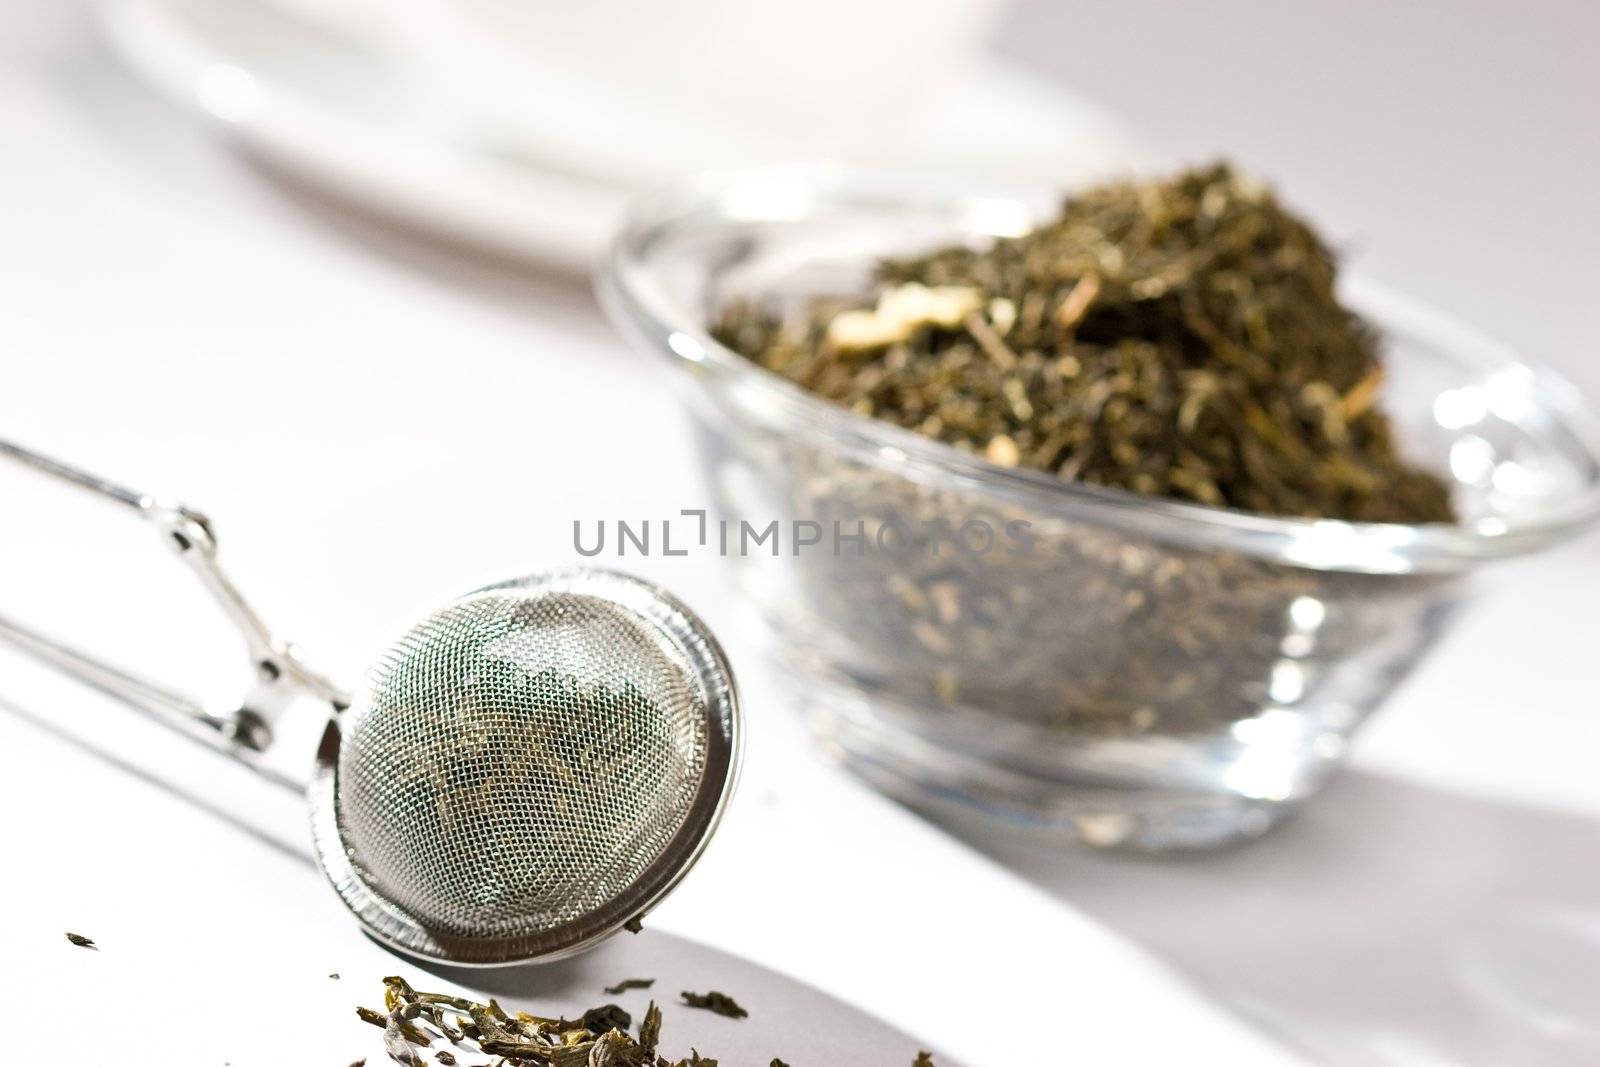 TEA STRAINER by agg